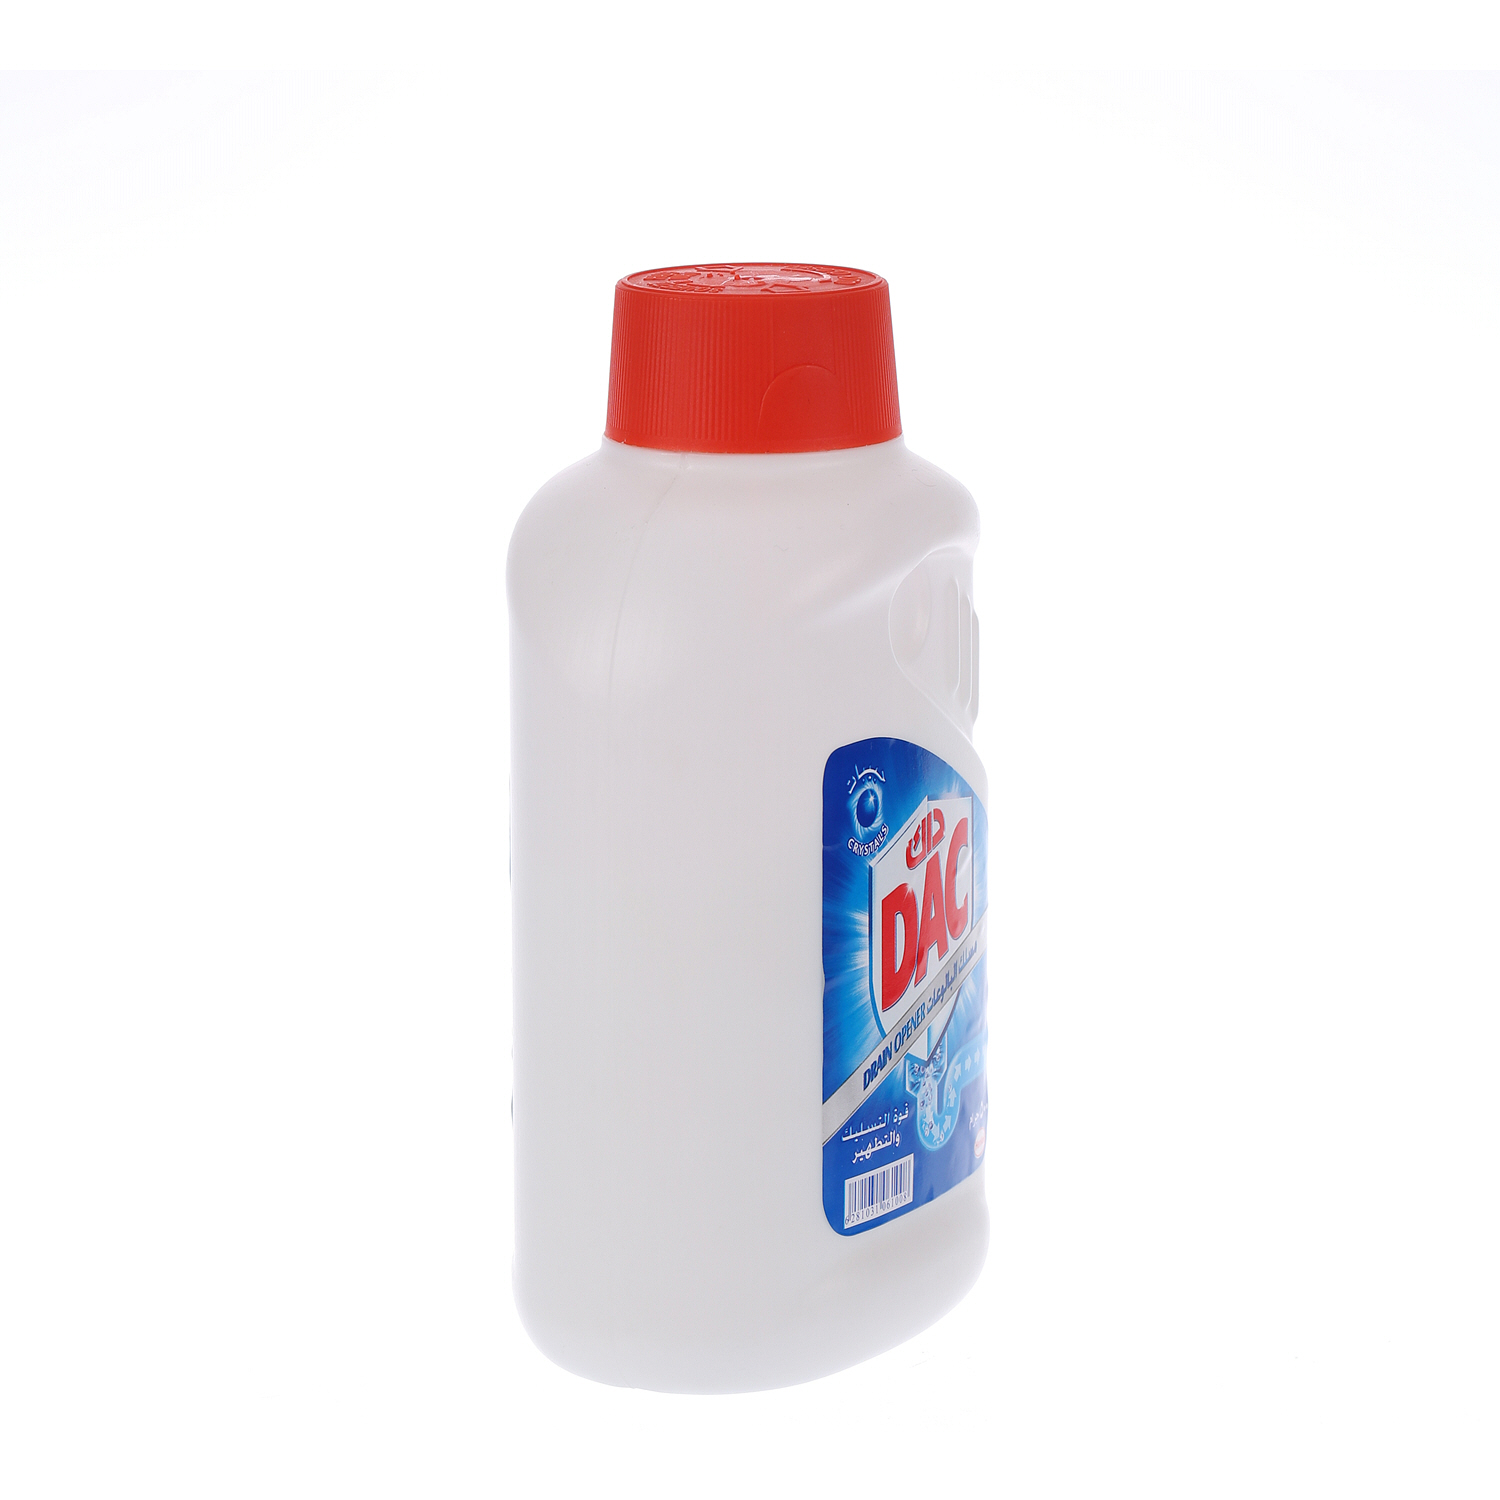 Dac Drain Crystals Cleaner 500 g